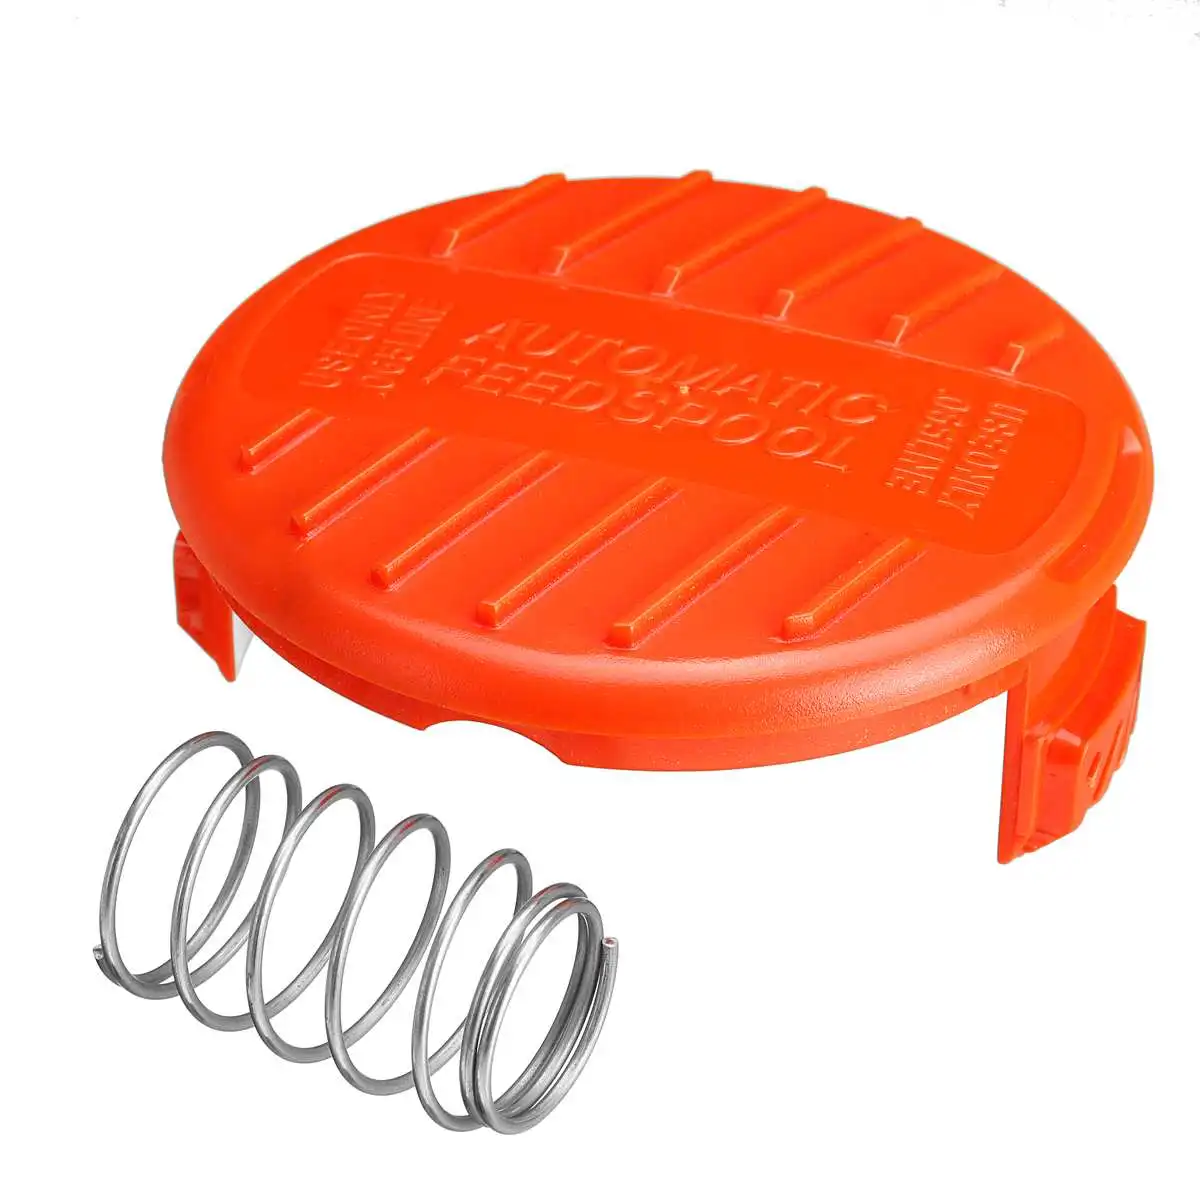 3x Spool Cap And Spring To Fit Black + Decker Weed Eater